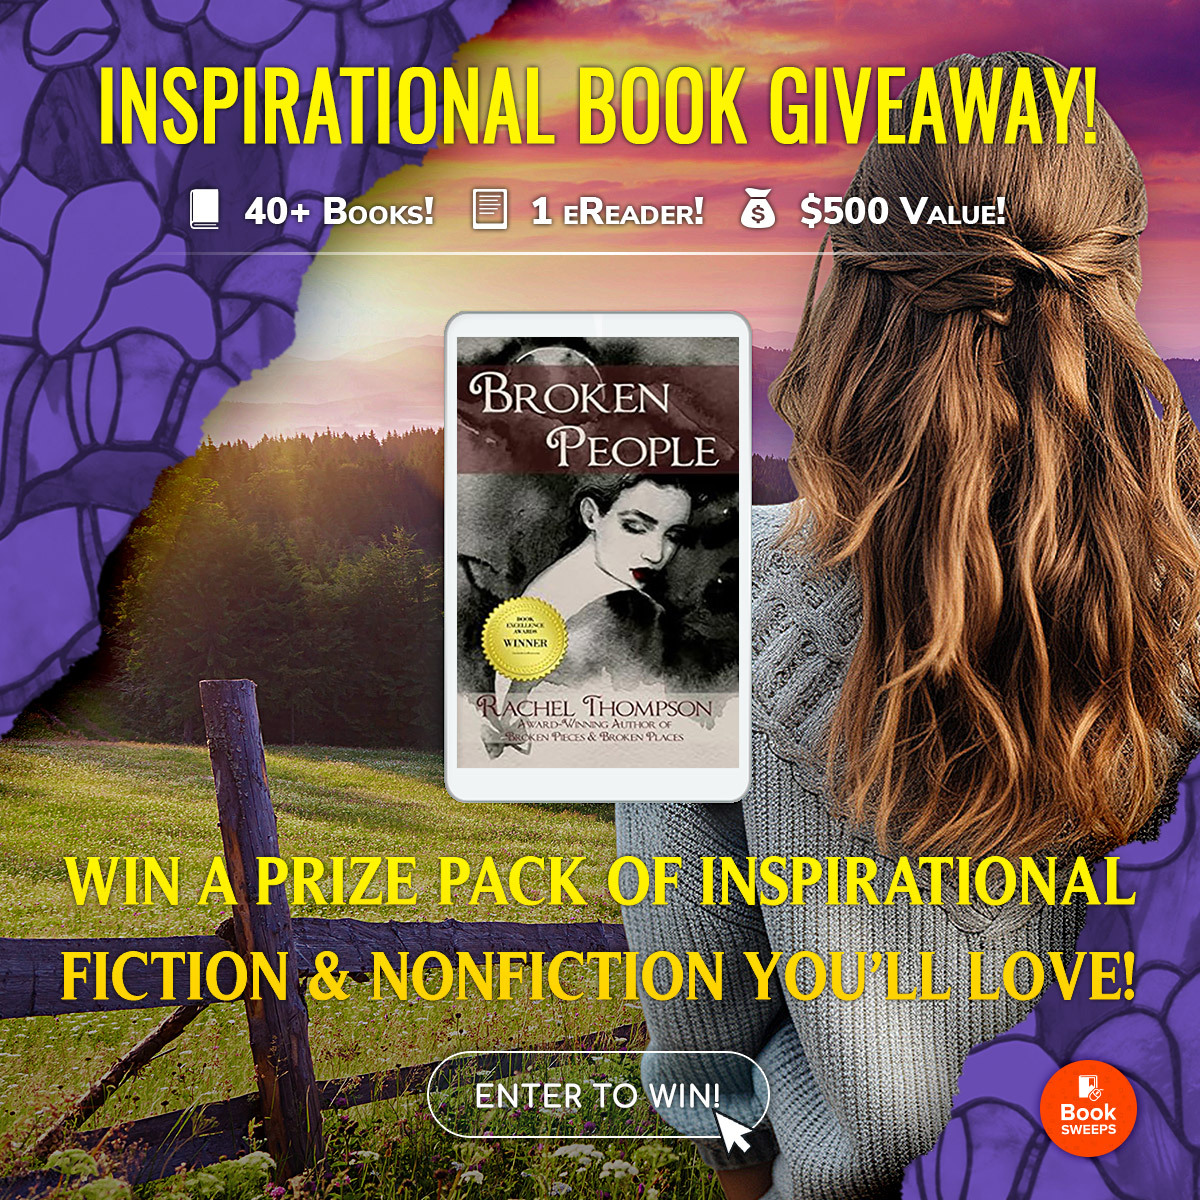 Enter for a chance to win #Inspirational #Fiction and #Nonfiction books from your favorite bestselling and award-winning authors, including BROKEN PEOPLE by @RachelintheOC, via @BookSweeps, plus a brand-new Kindle Fire! bit.ly/inspirational-… #AmReading #MustReadBooks #Books